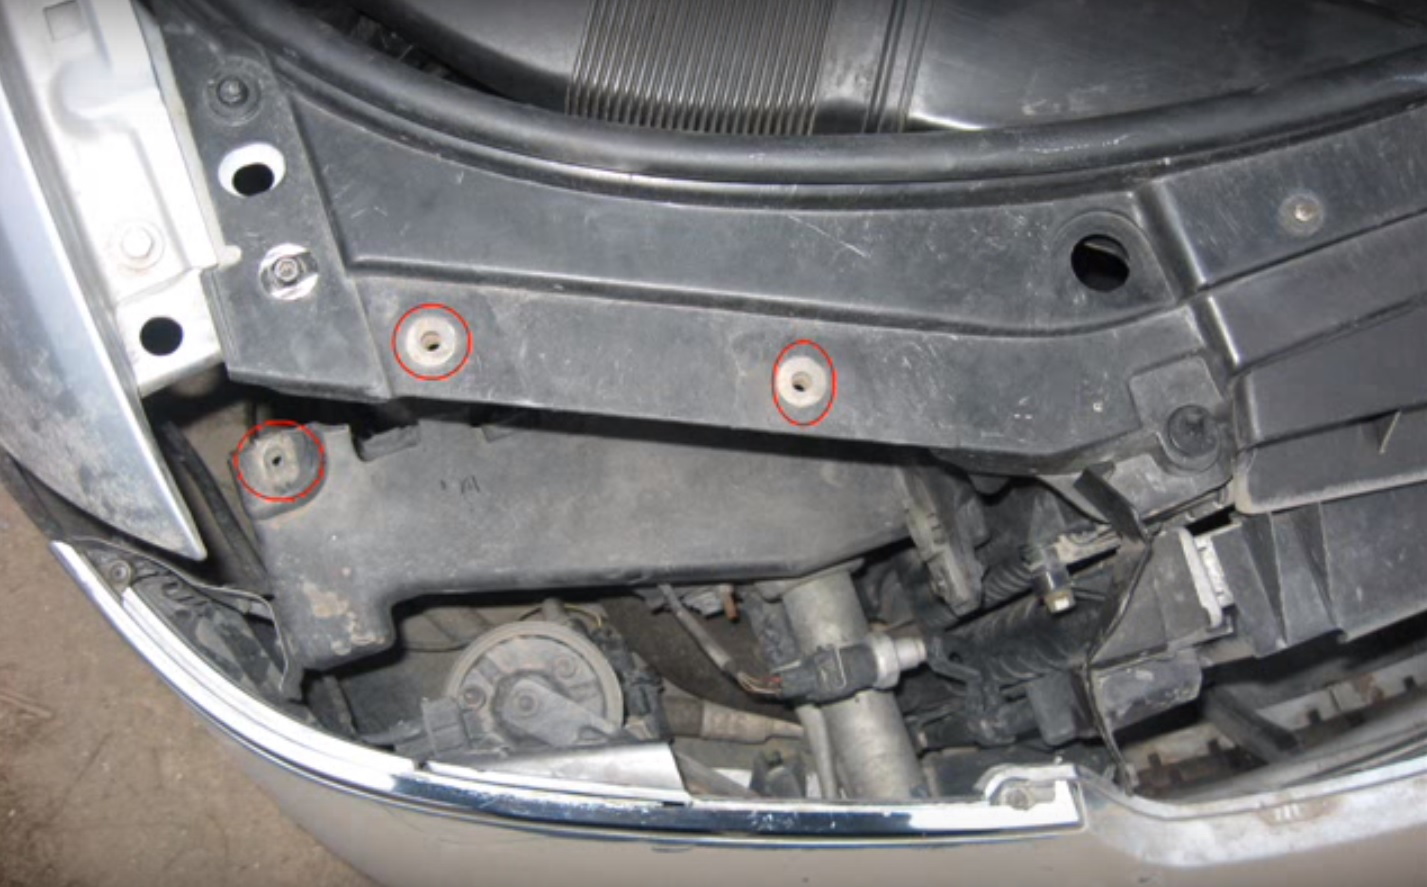 Remove the three bolts from the passenger side headlight.